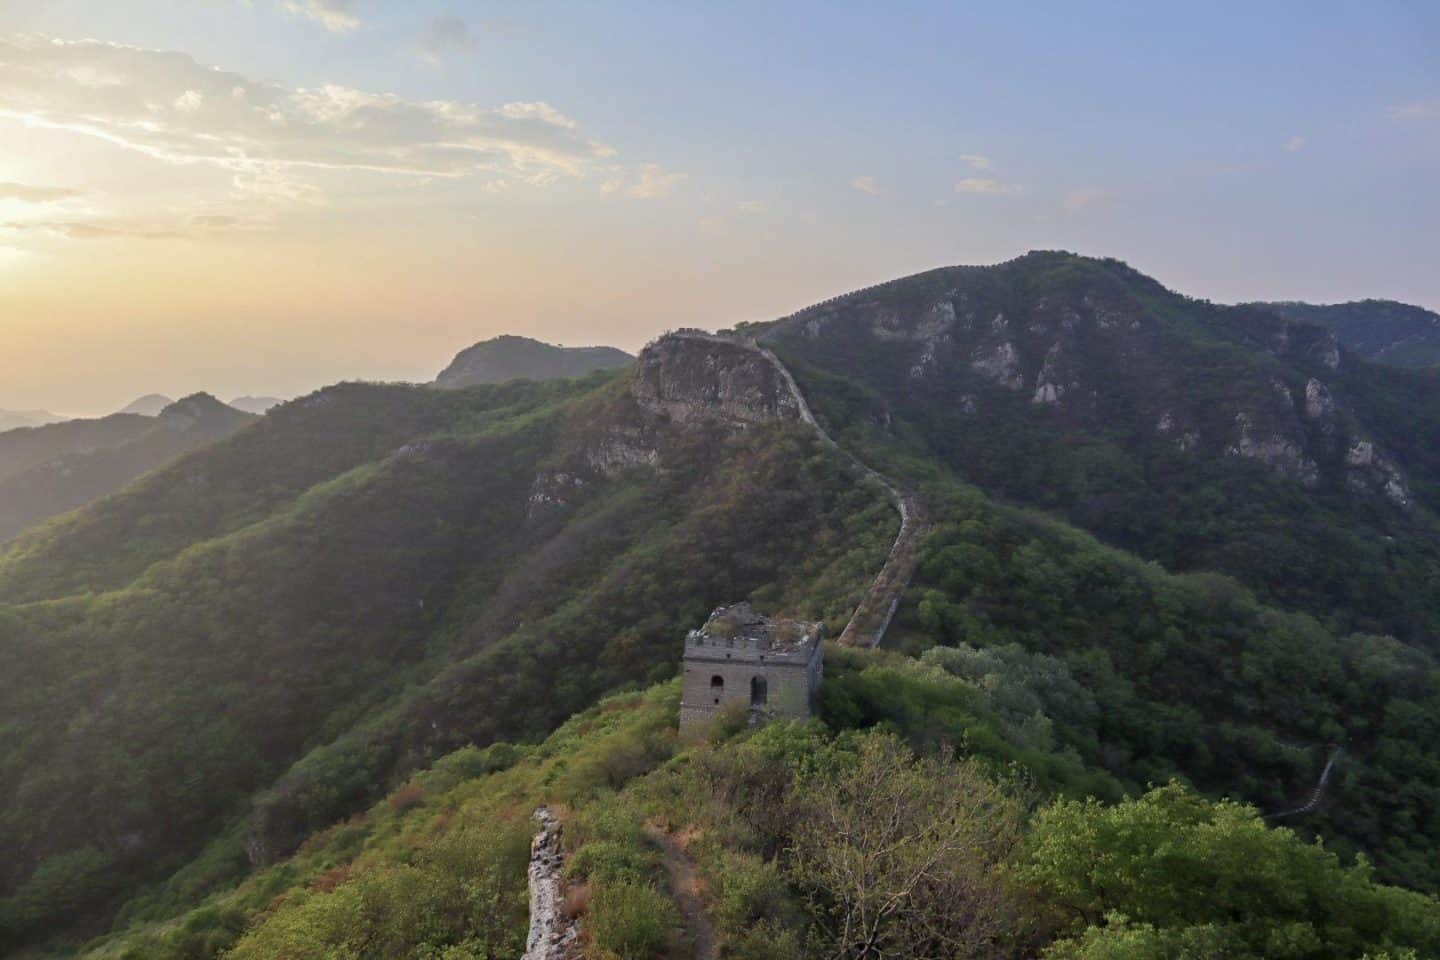 camping on Great Wall of China, disused part of the great wall of china